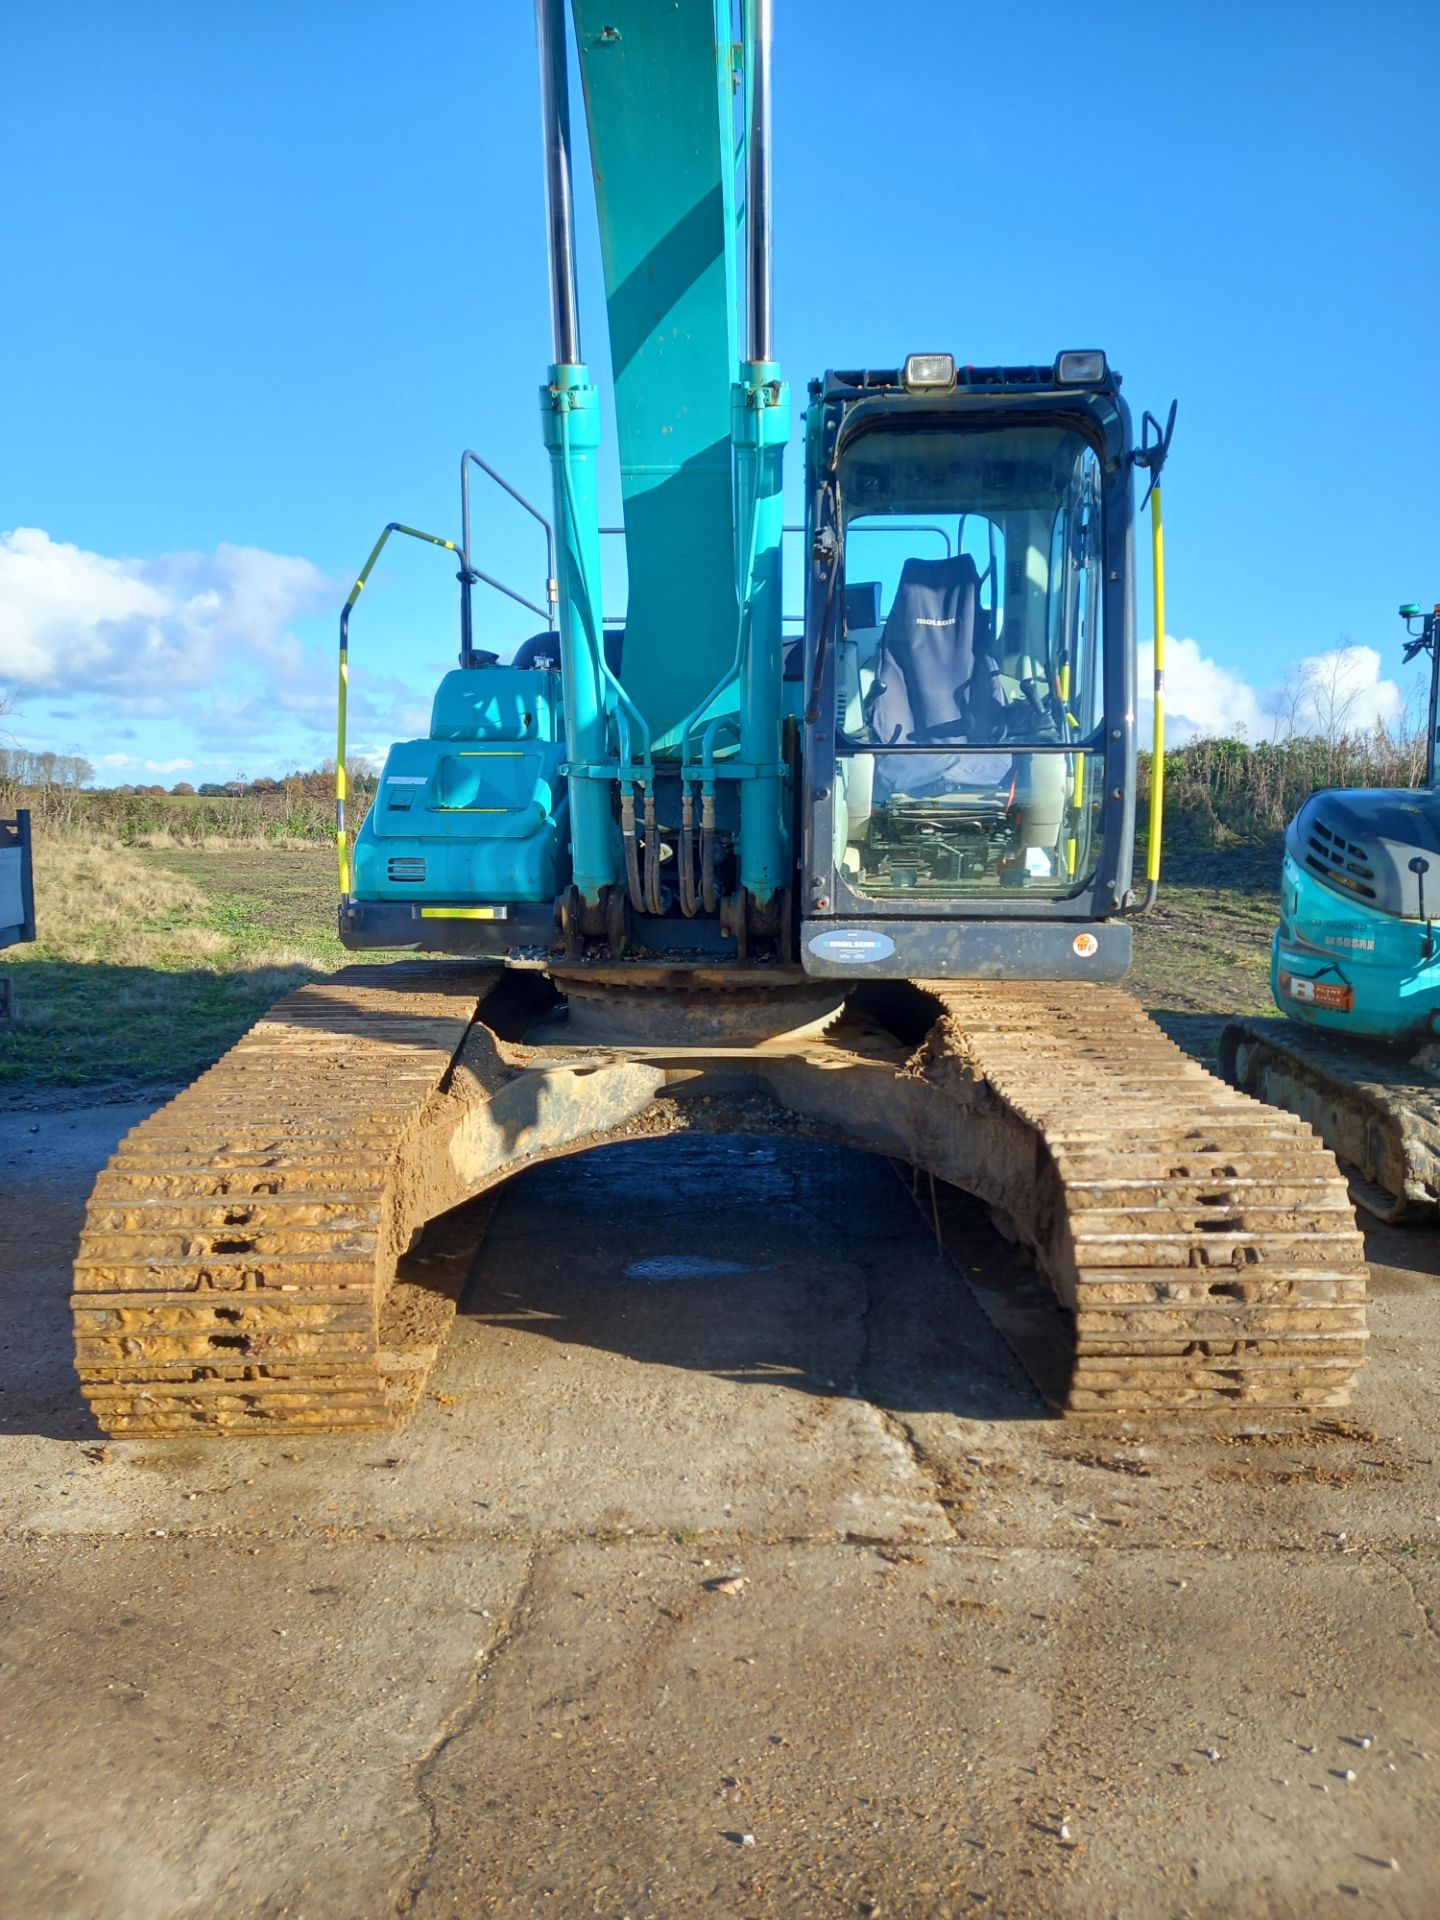 2017 Kobelco Model SK210LC-10 21 Tonne Crawler Excavator with Quick Hitch - Image 12 of 14